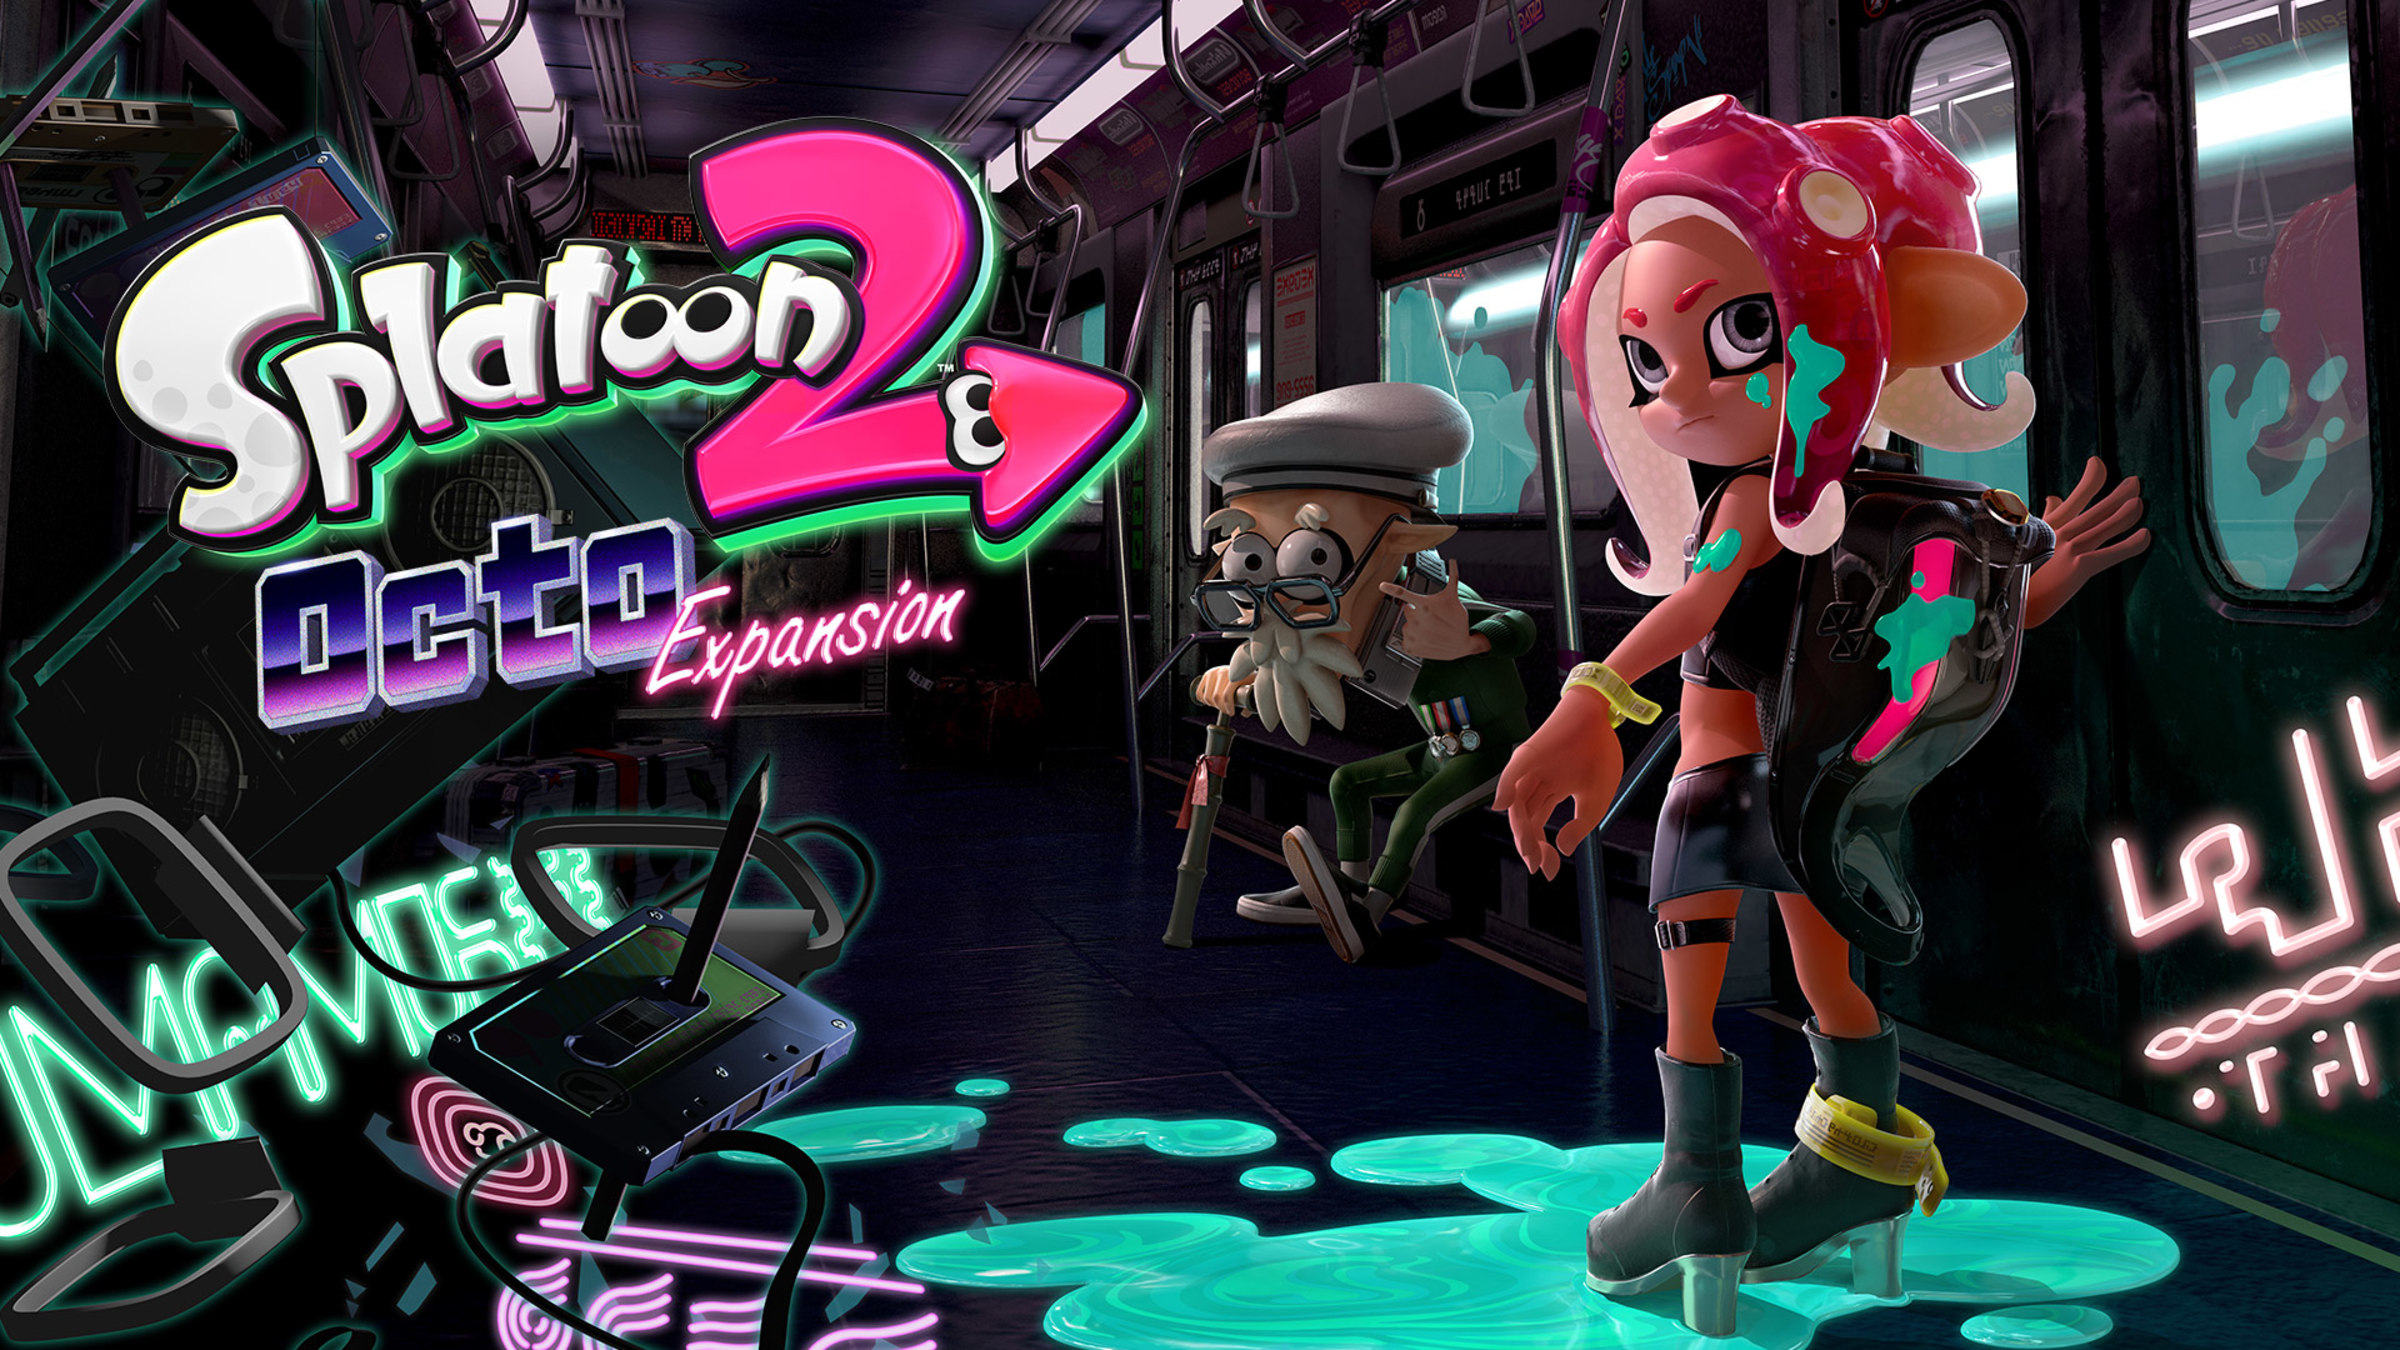 Splatoon™ 2: Octo Expansion for Nintendo Switch - Nintendo Official Site